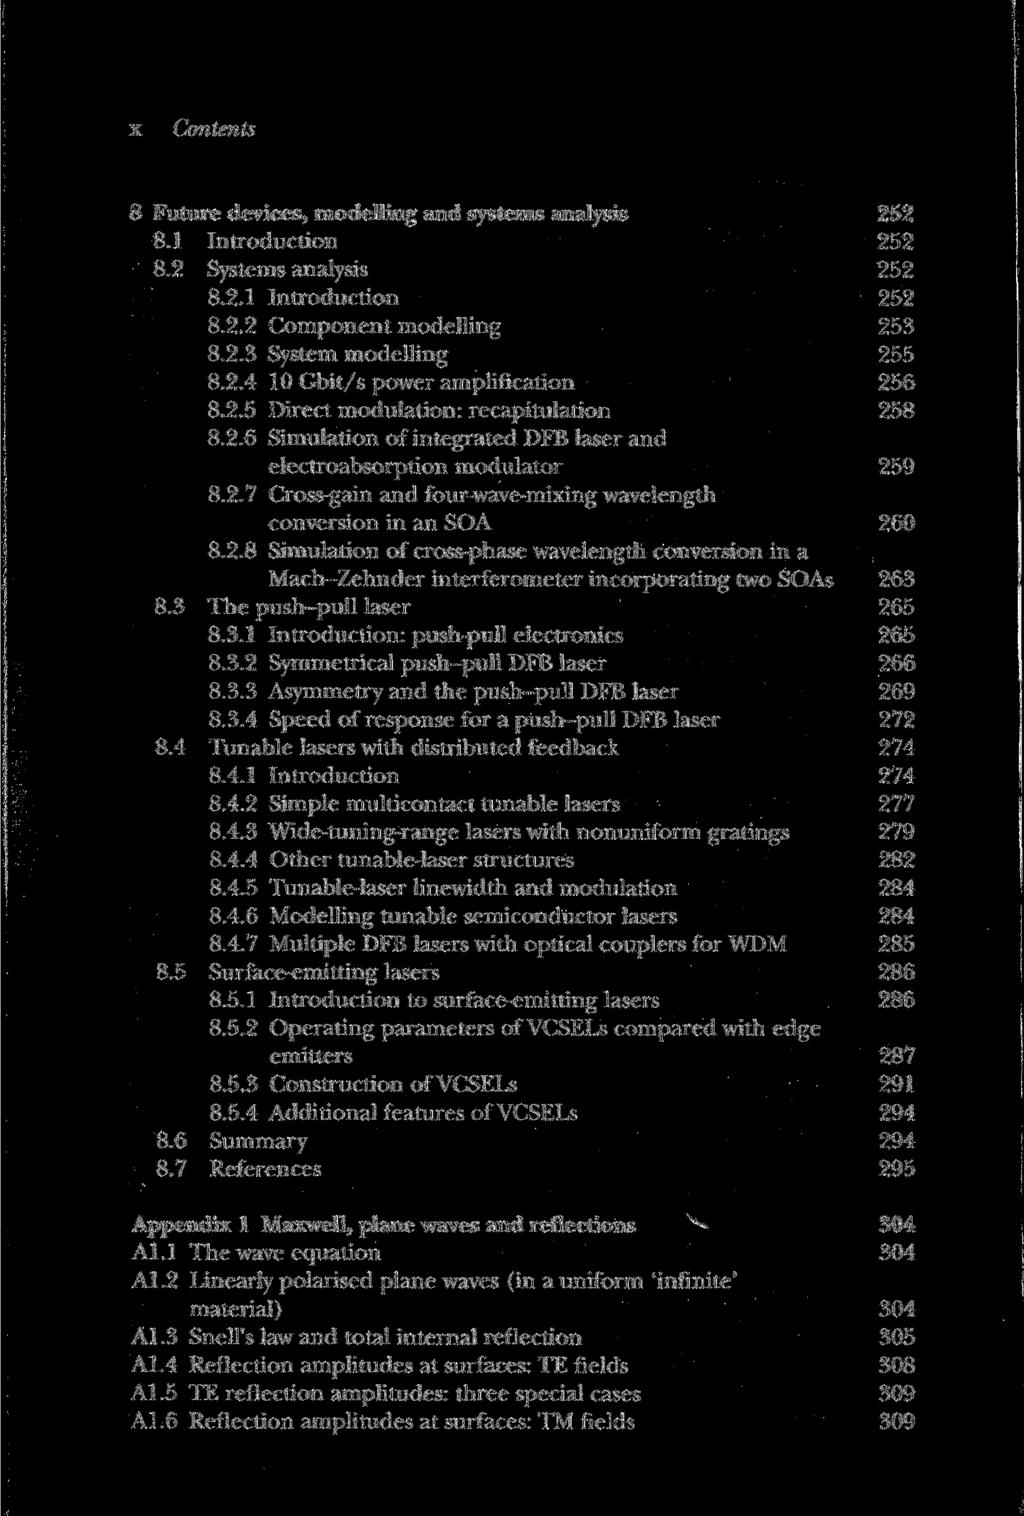 x 8 Future devices, modelling and systems analysis 252 8.1 Introduction 252 8.2 Systems analysis 252 8.2.1 Introduction 252 8.2.2 Component modelling 253 8.2.3 System modelling 255 8.2.4 10 Gbit/s power amplification 256 8.